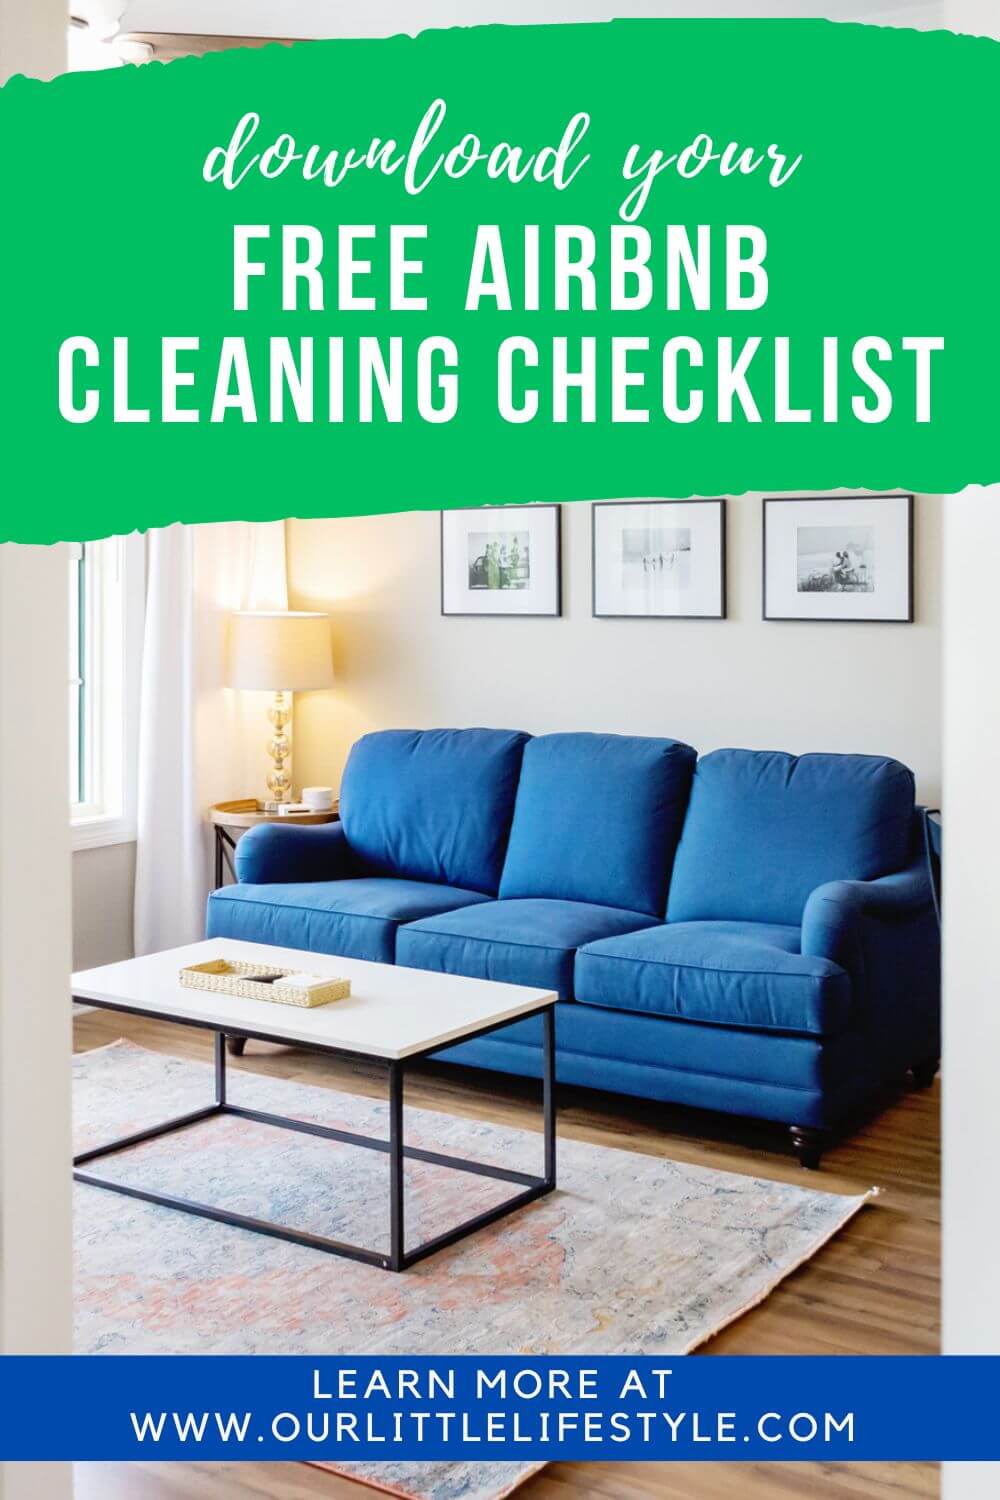 Cleaning Checklist For Airbnb Rental Properties